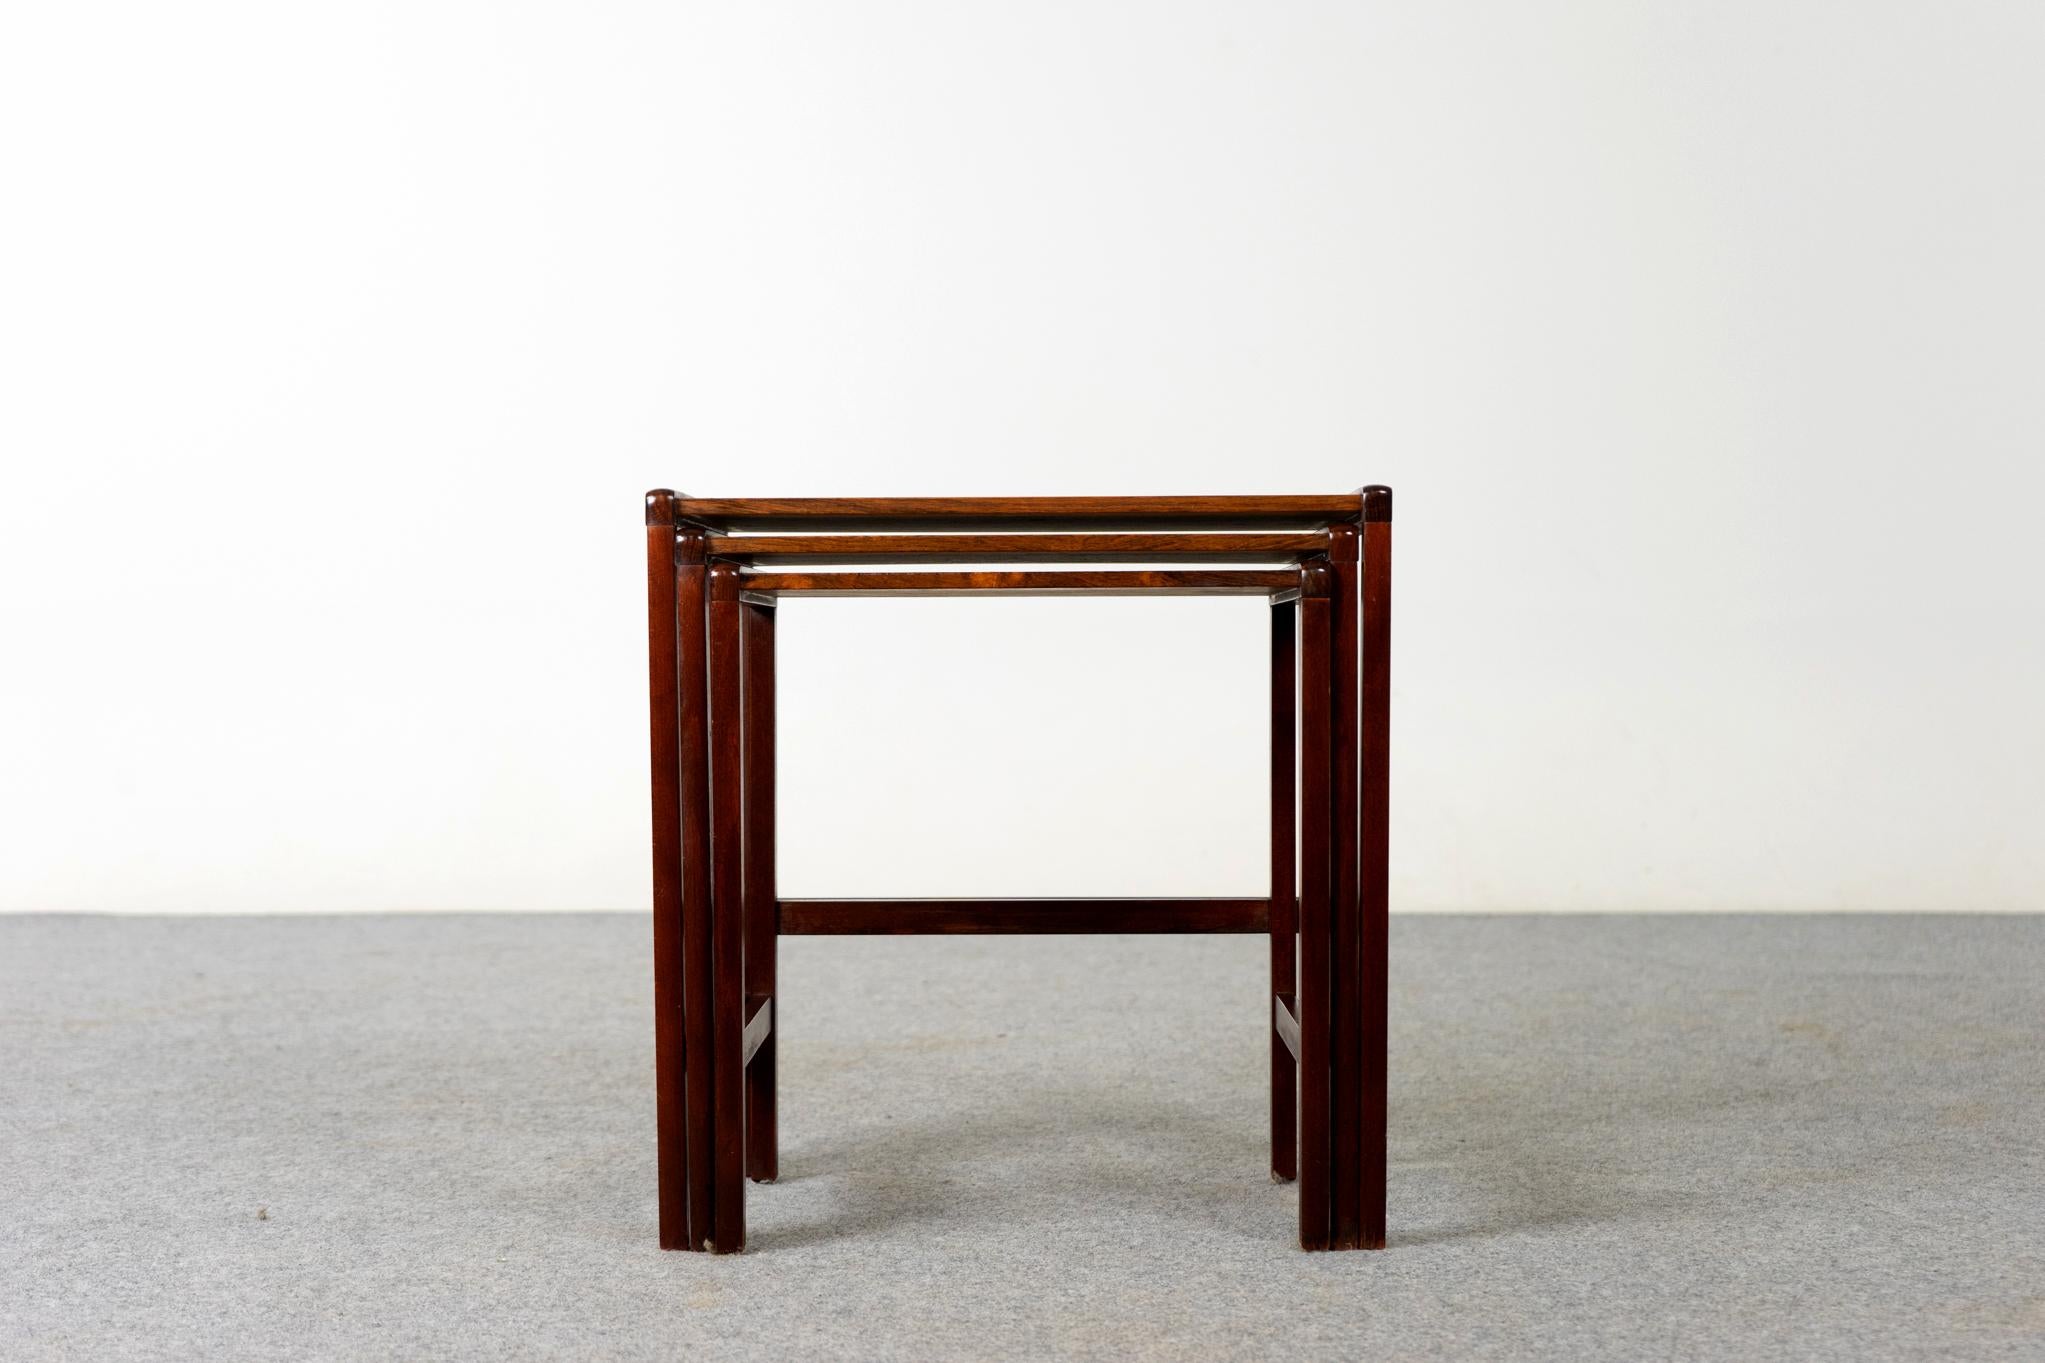 Rosewood Scandinavian nesting tables, circa 1970's. Use them individually or nest them together to save space. Book matched veneer and solid wood trim make these an elegant addition to any living room. Make the most of the space have with these